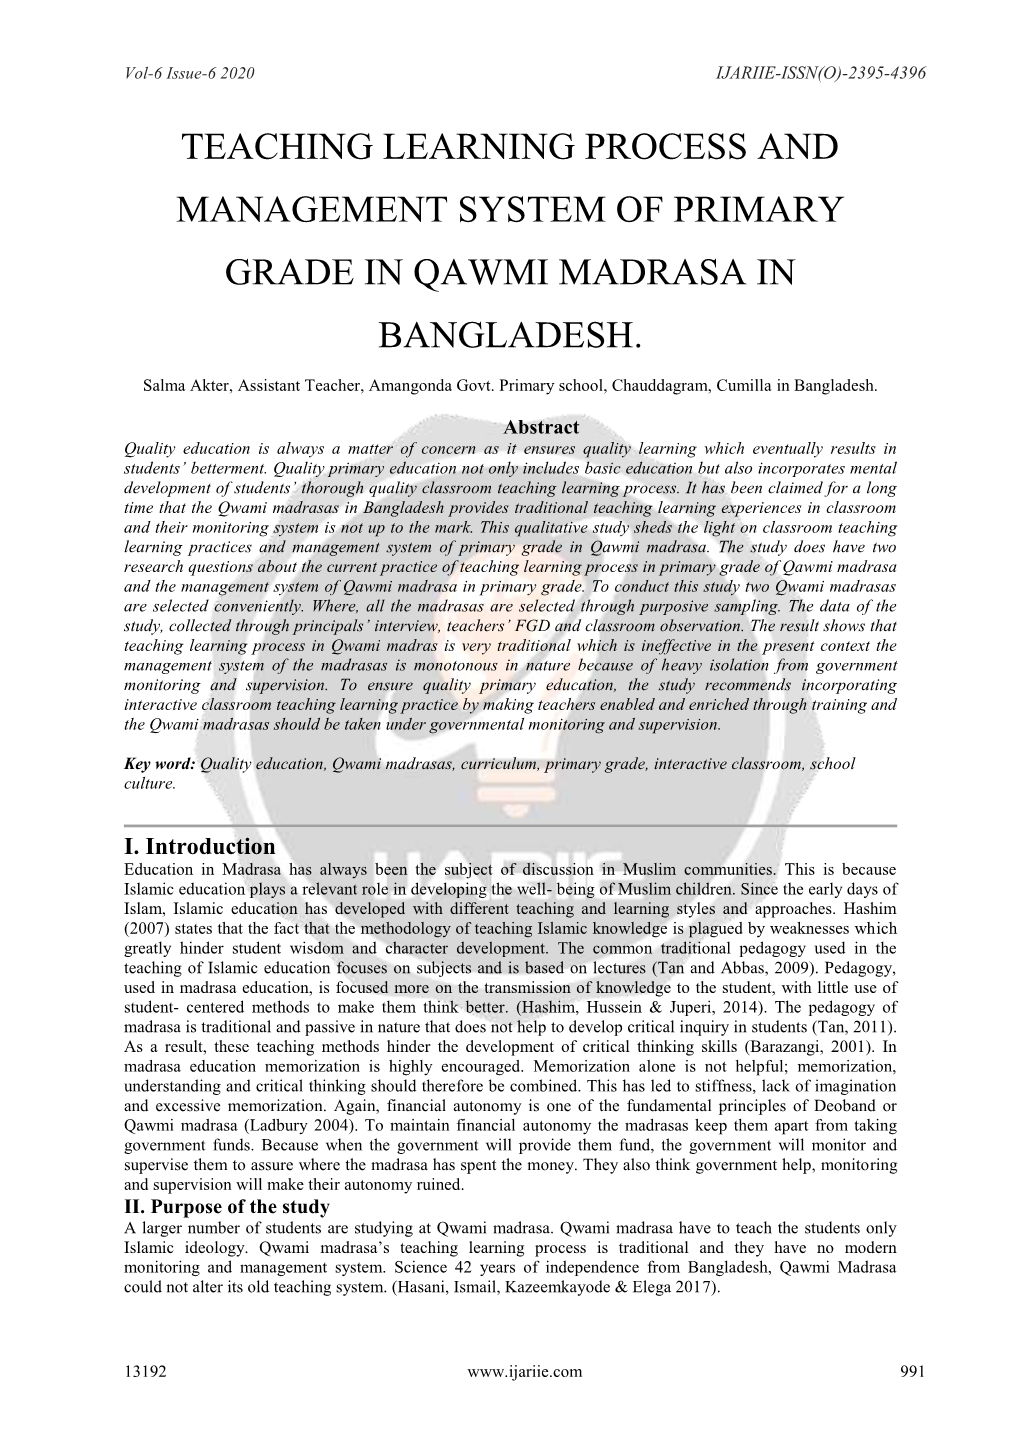 Teaching Learning Process and Management System of Primary Grade in Qawmi Madrasa in Bangladesh